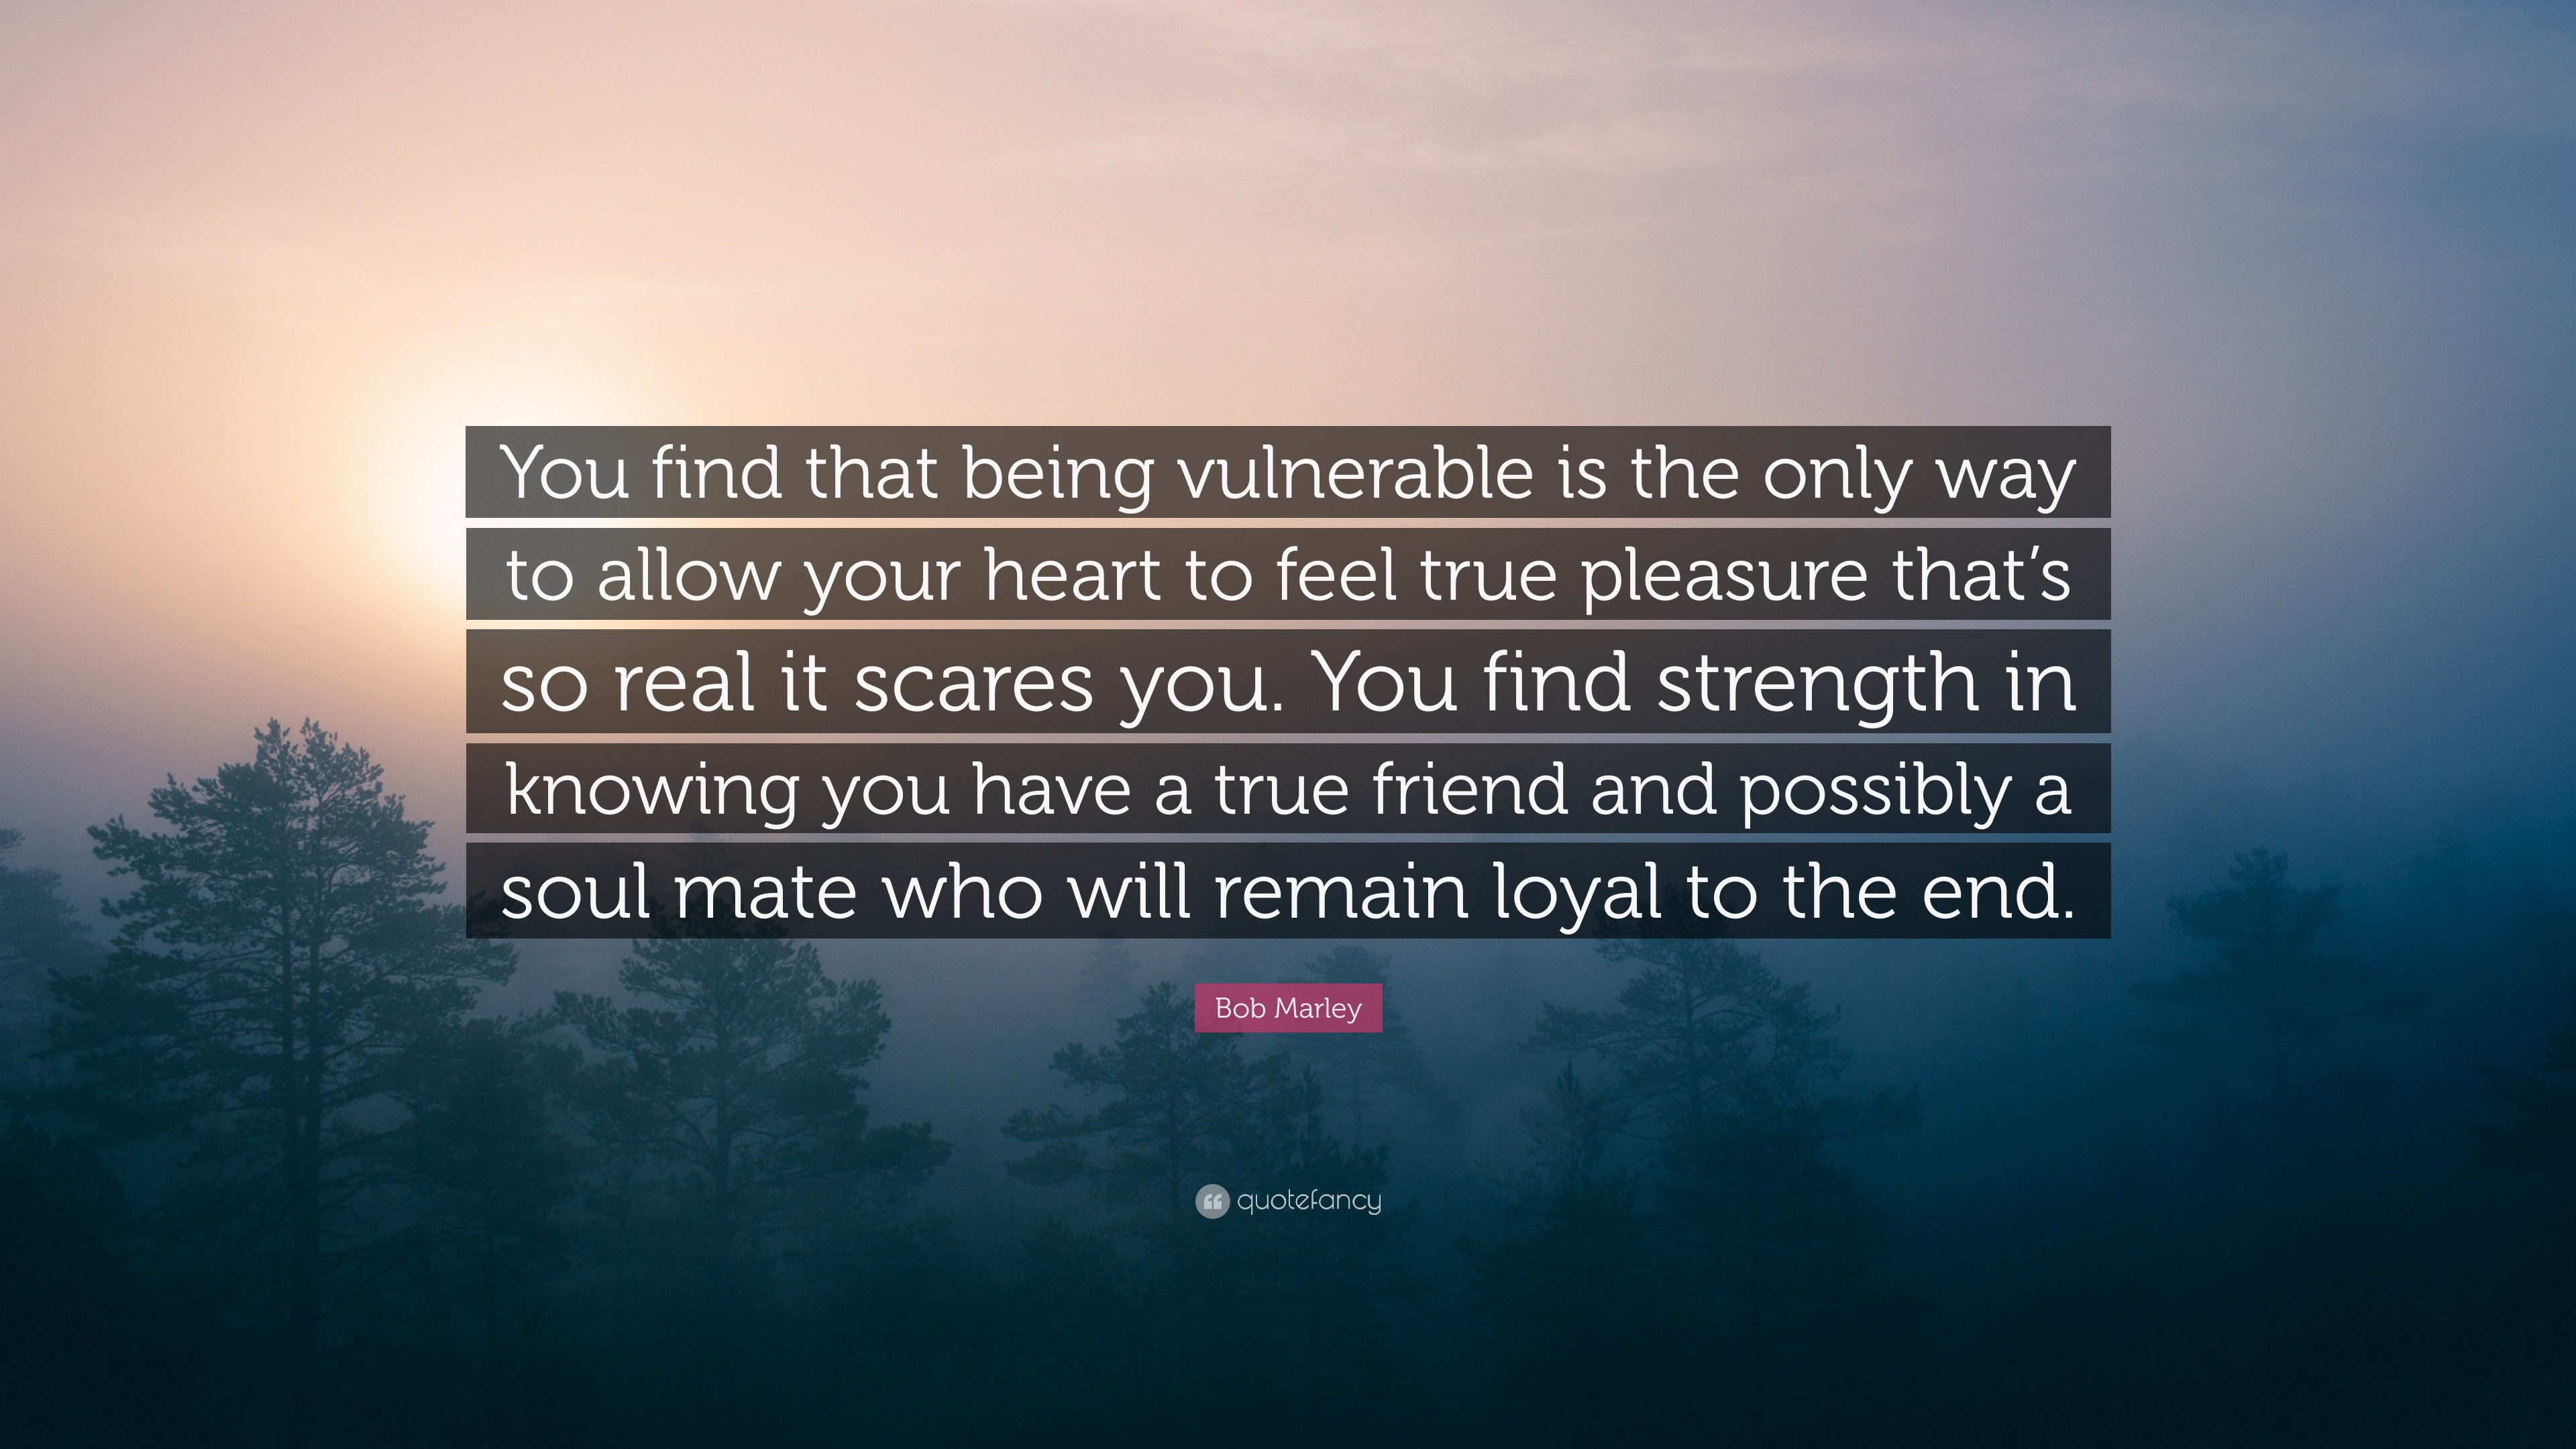 Bob Marley Quote: “You find that being vulnerable is the only way to